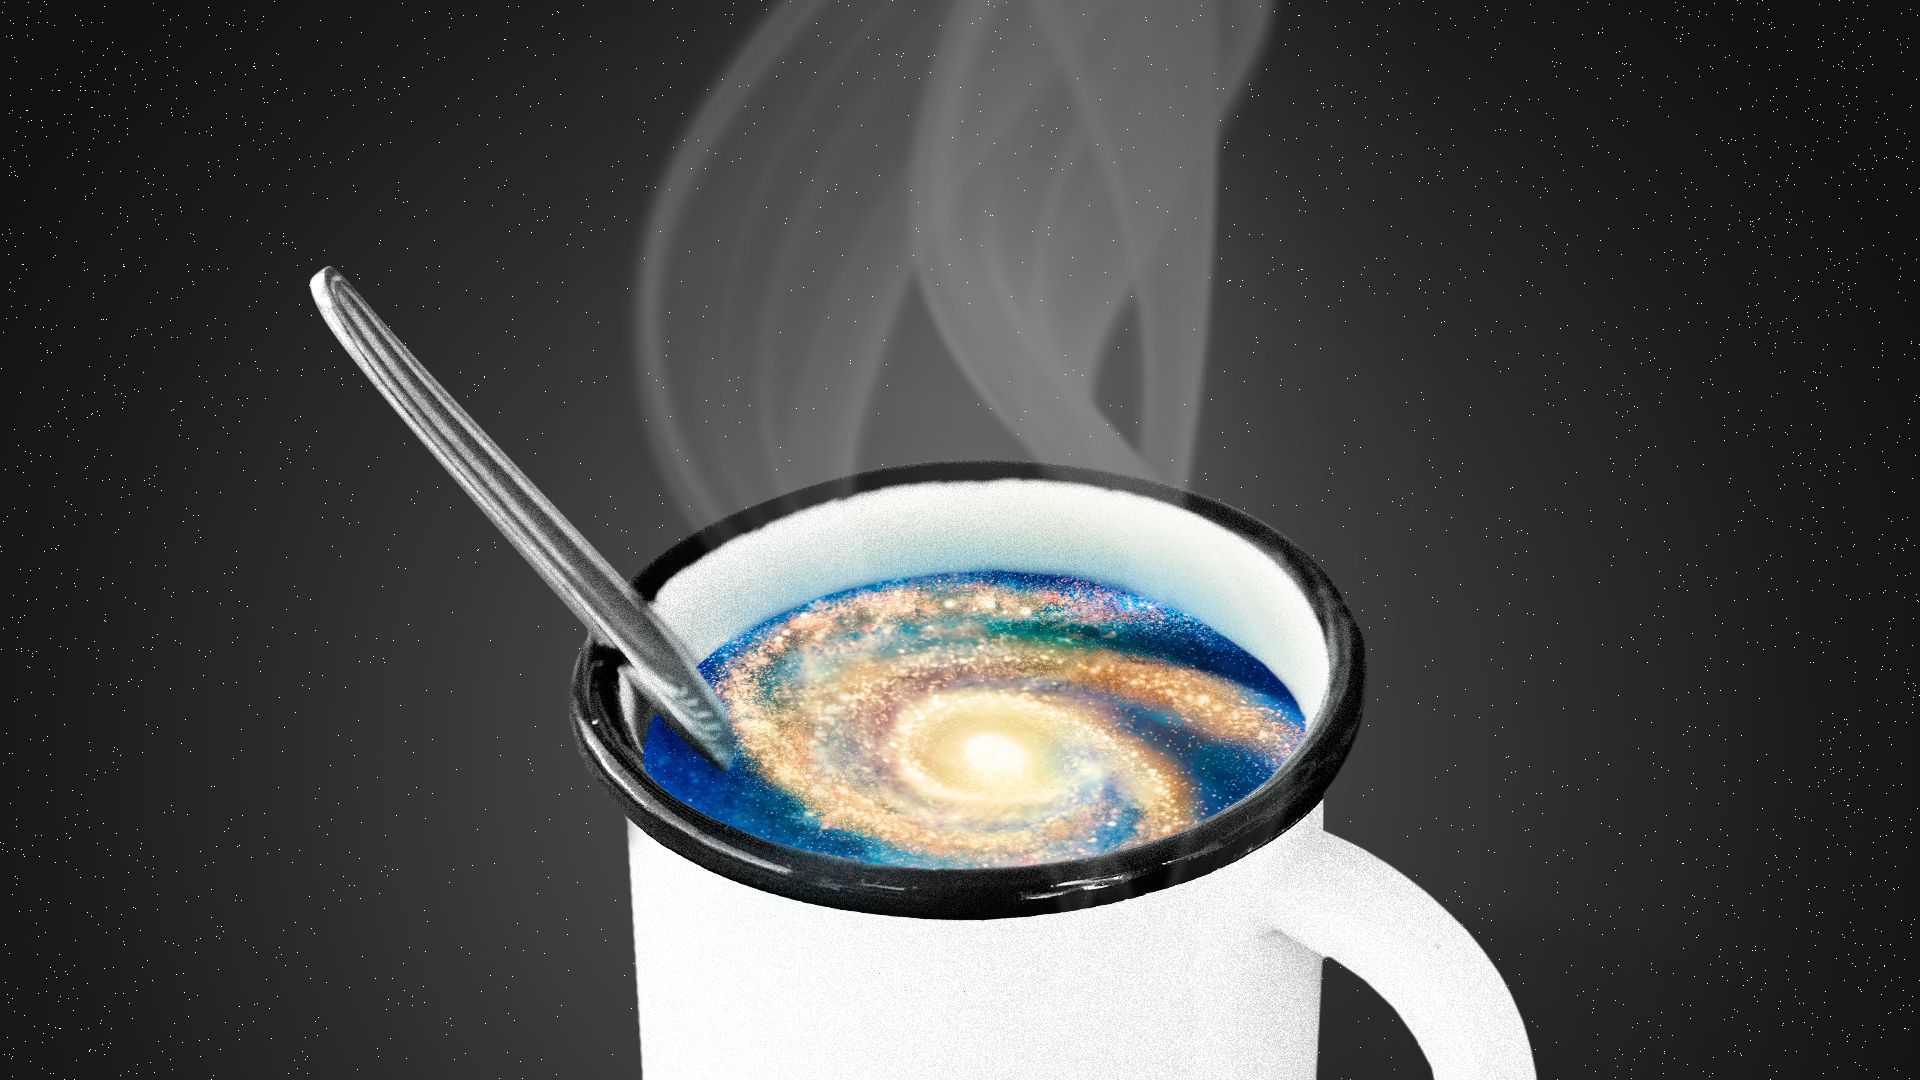 Illustration of the Milky Way in a coffee cup.